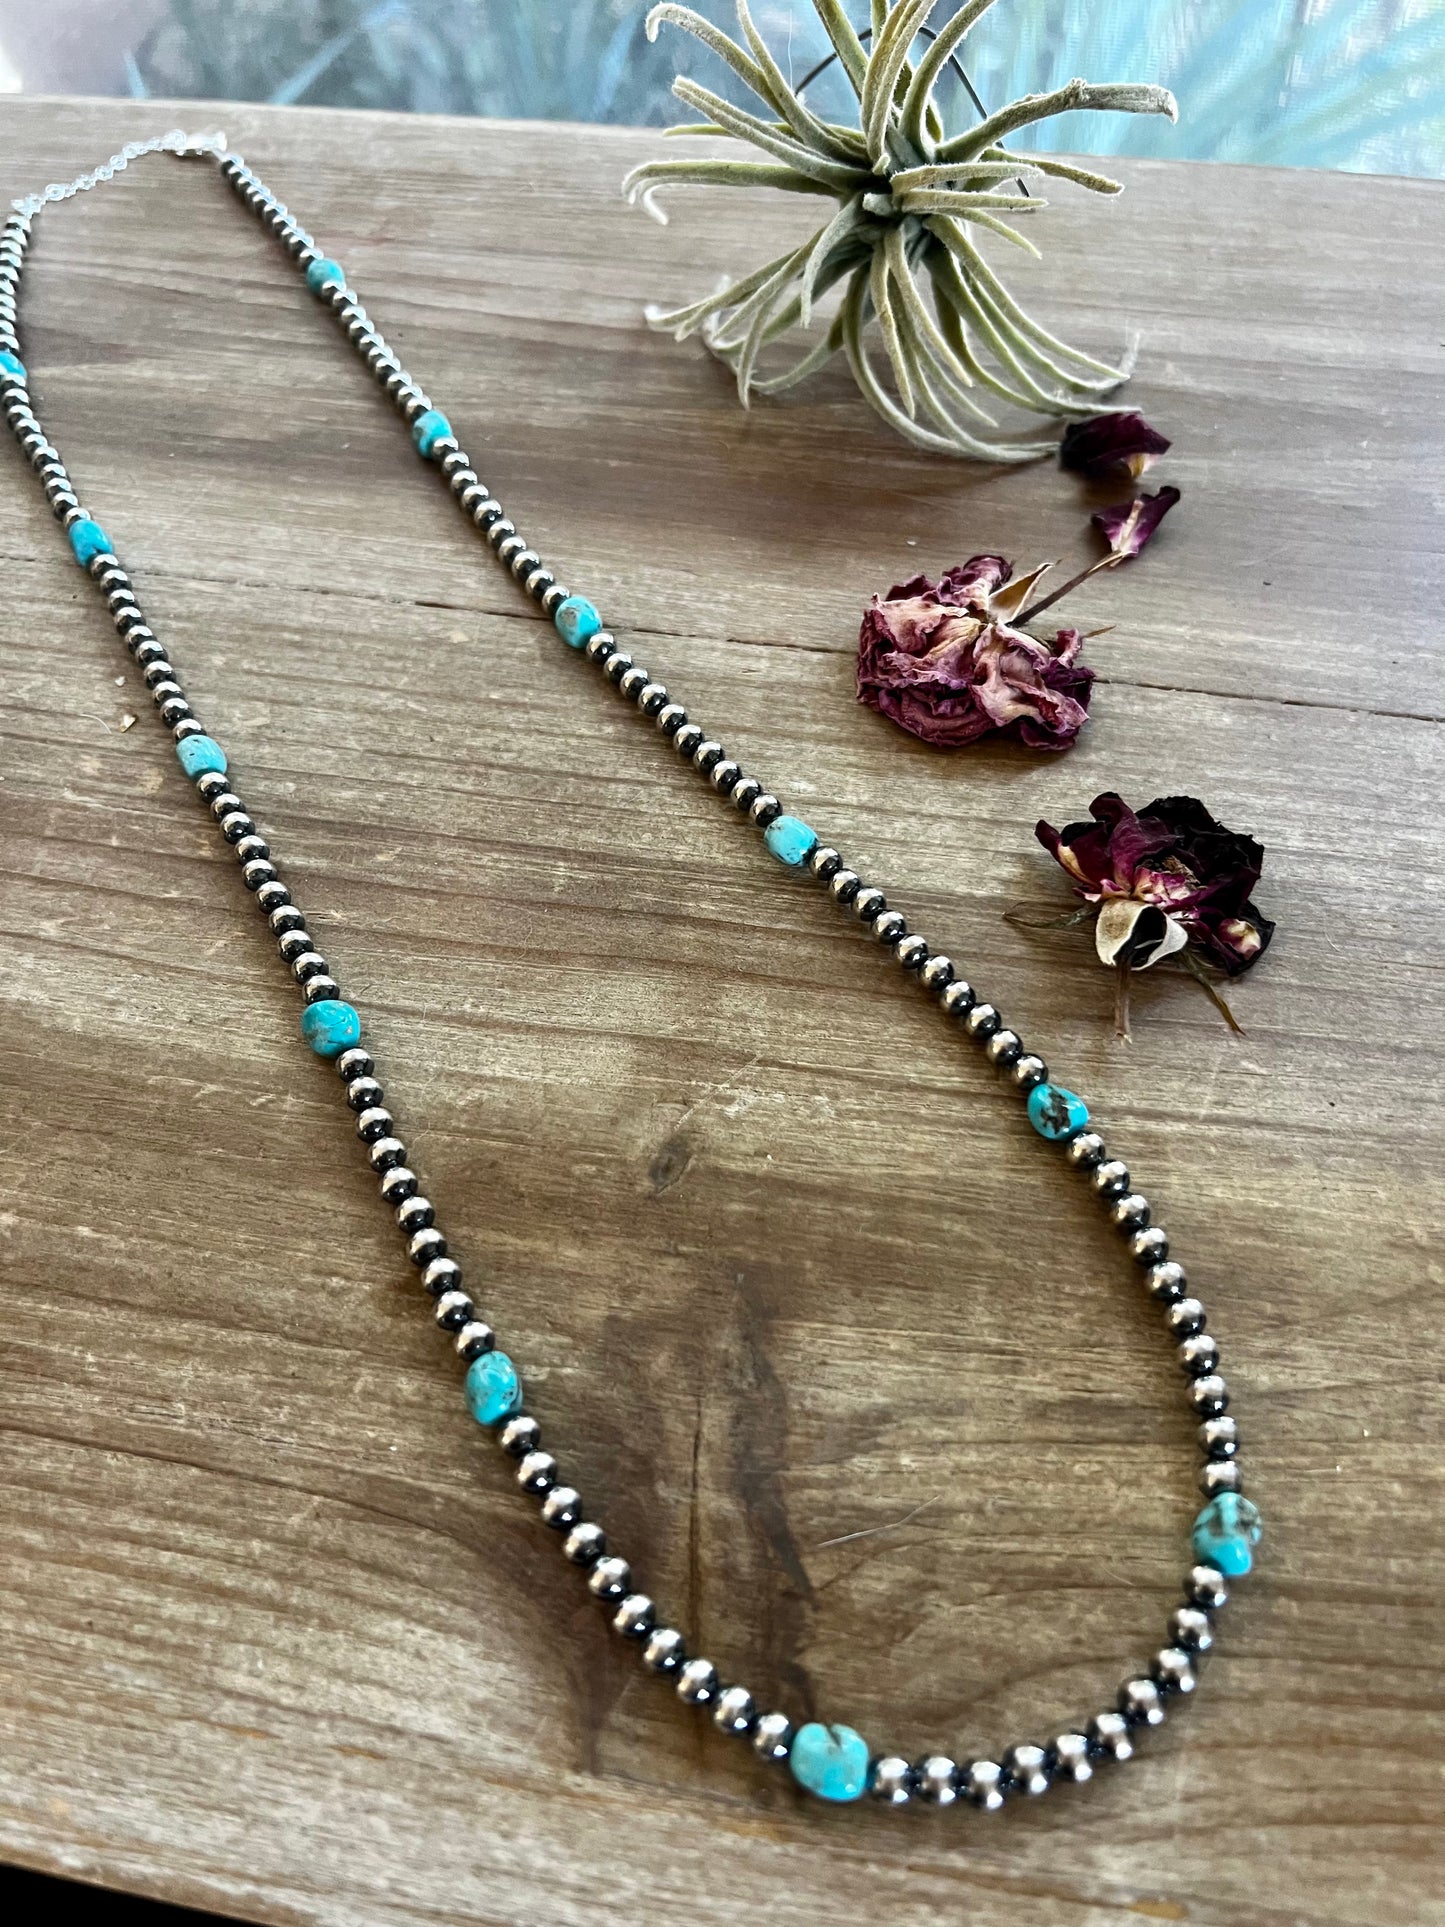 28 inch 5 mm Sterling Silver Pearls necklace with turquoise